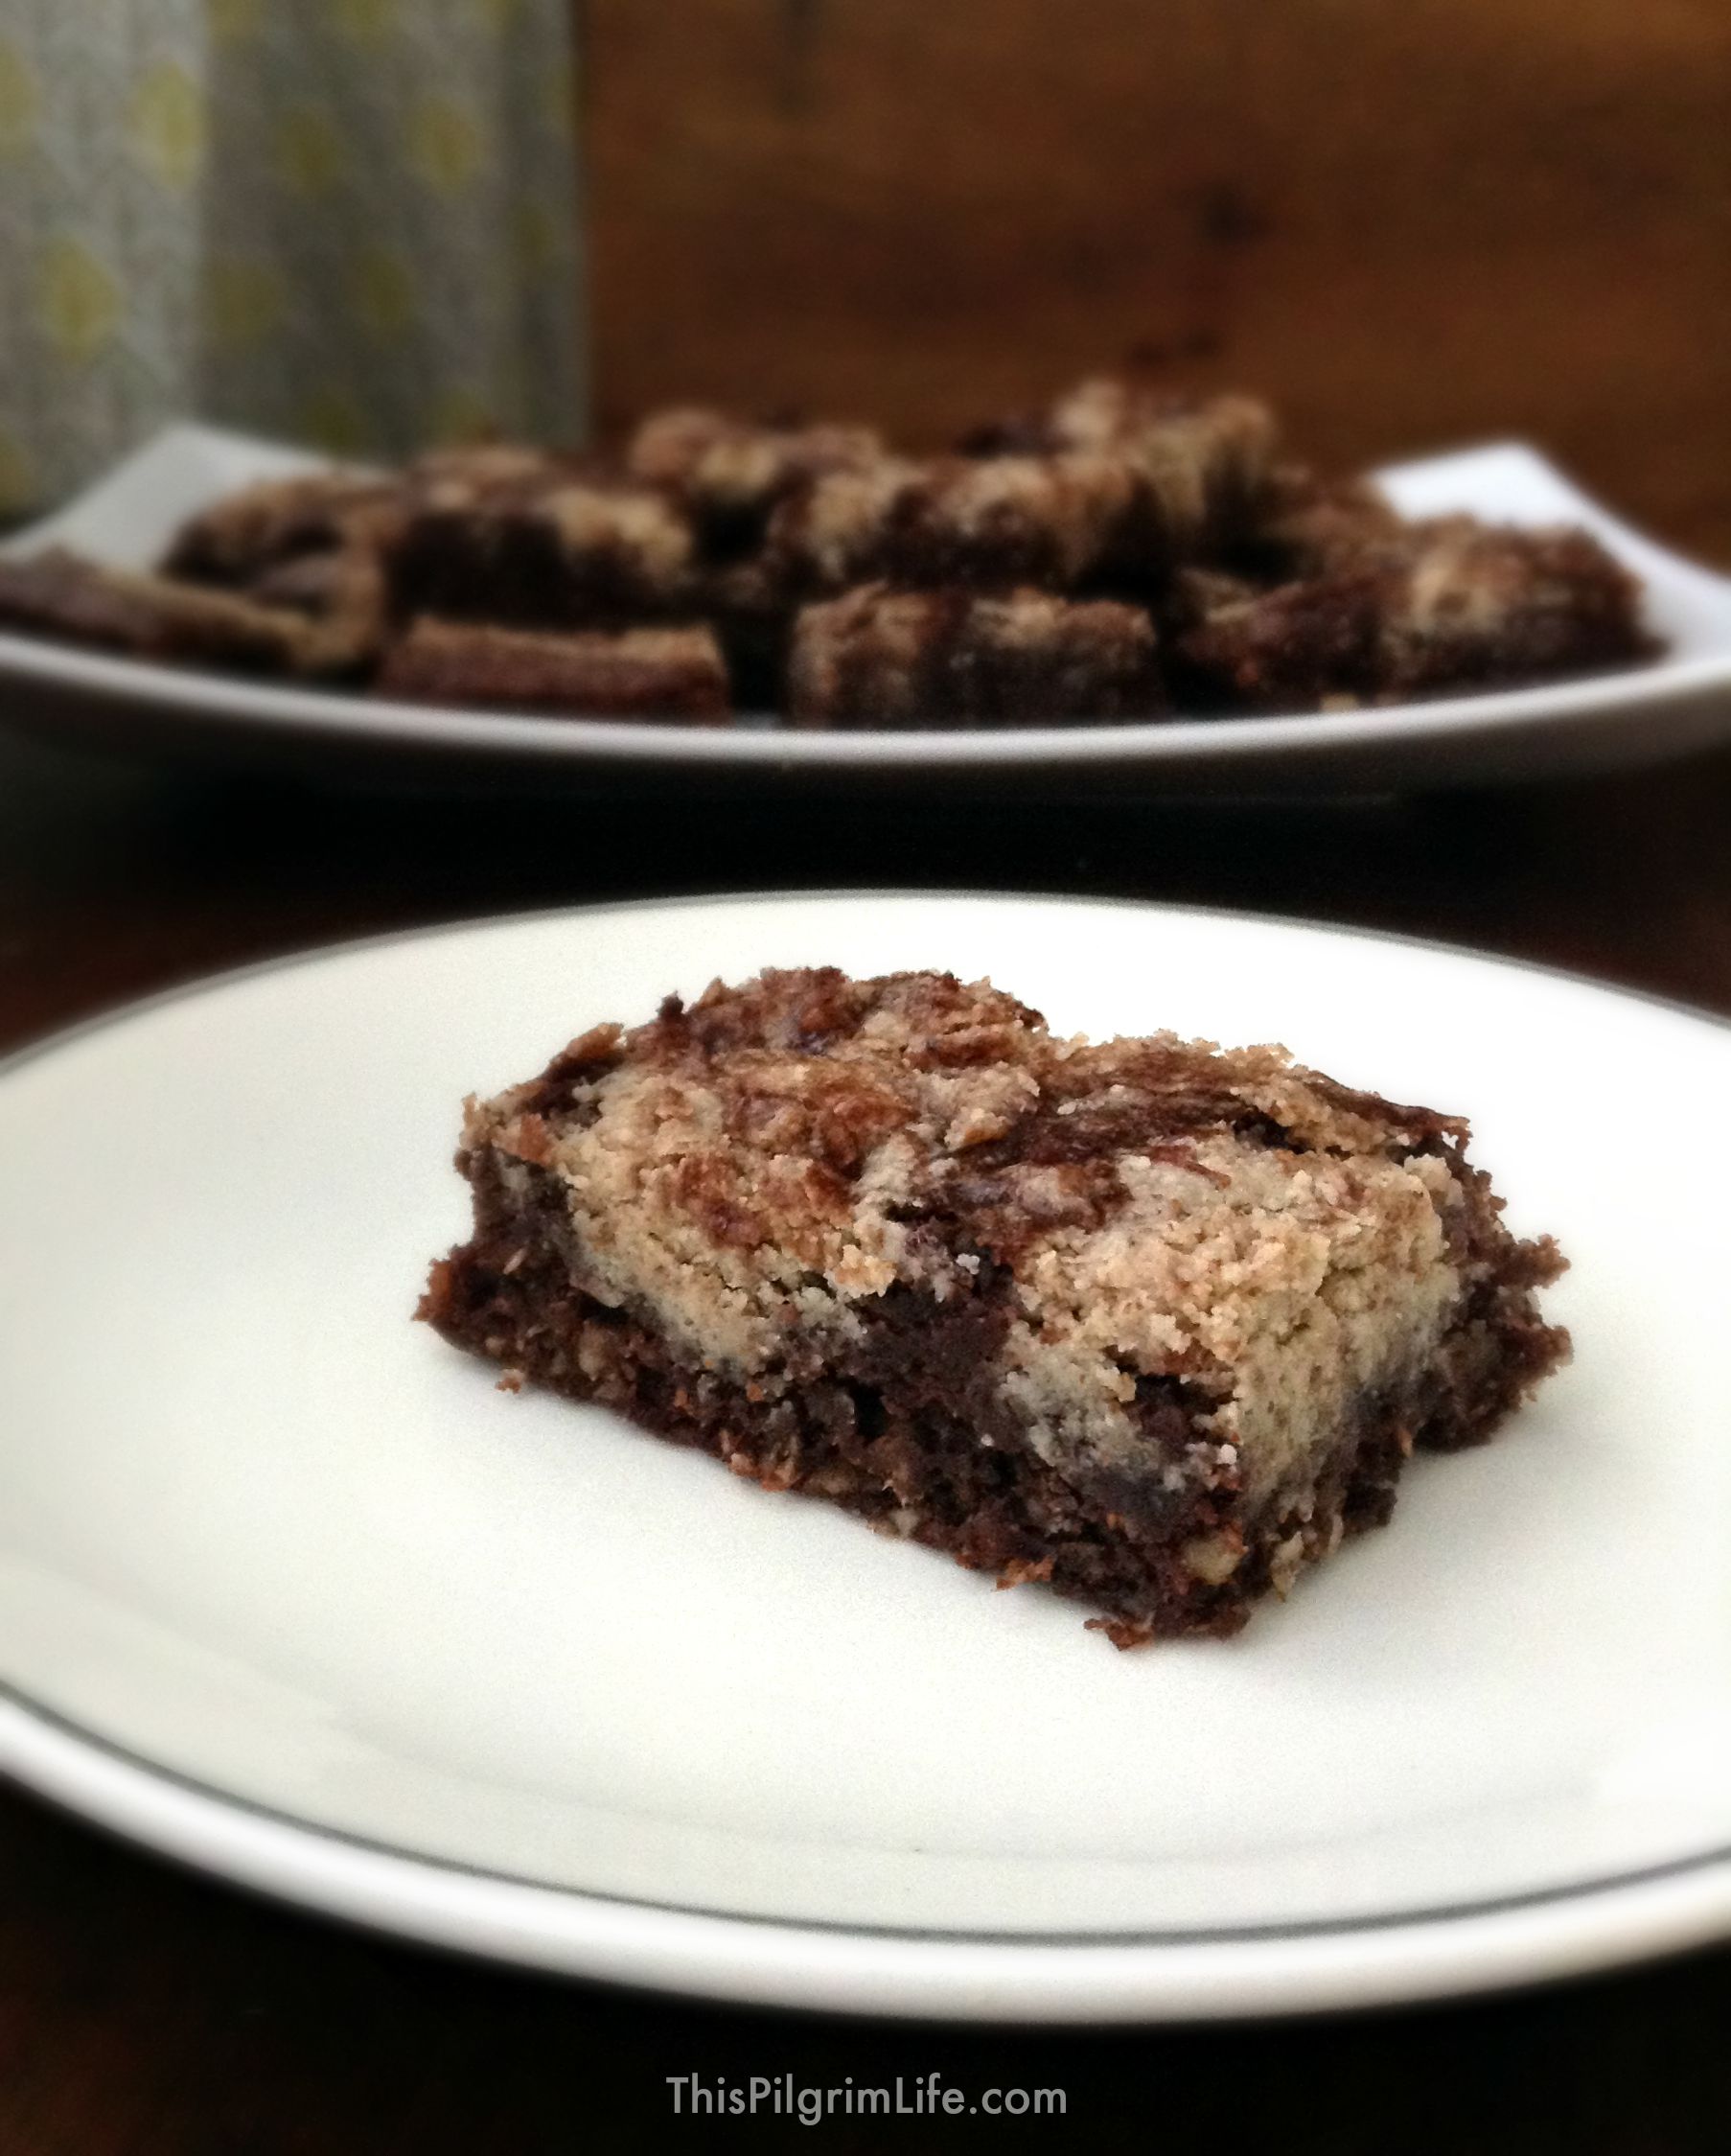 These almond joy brownies are delicious AND gluten-free and dairy-free. Quick and simple to make, too. 